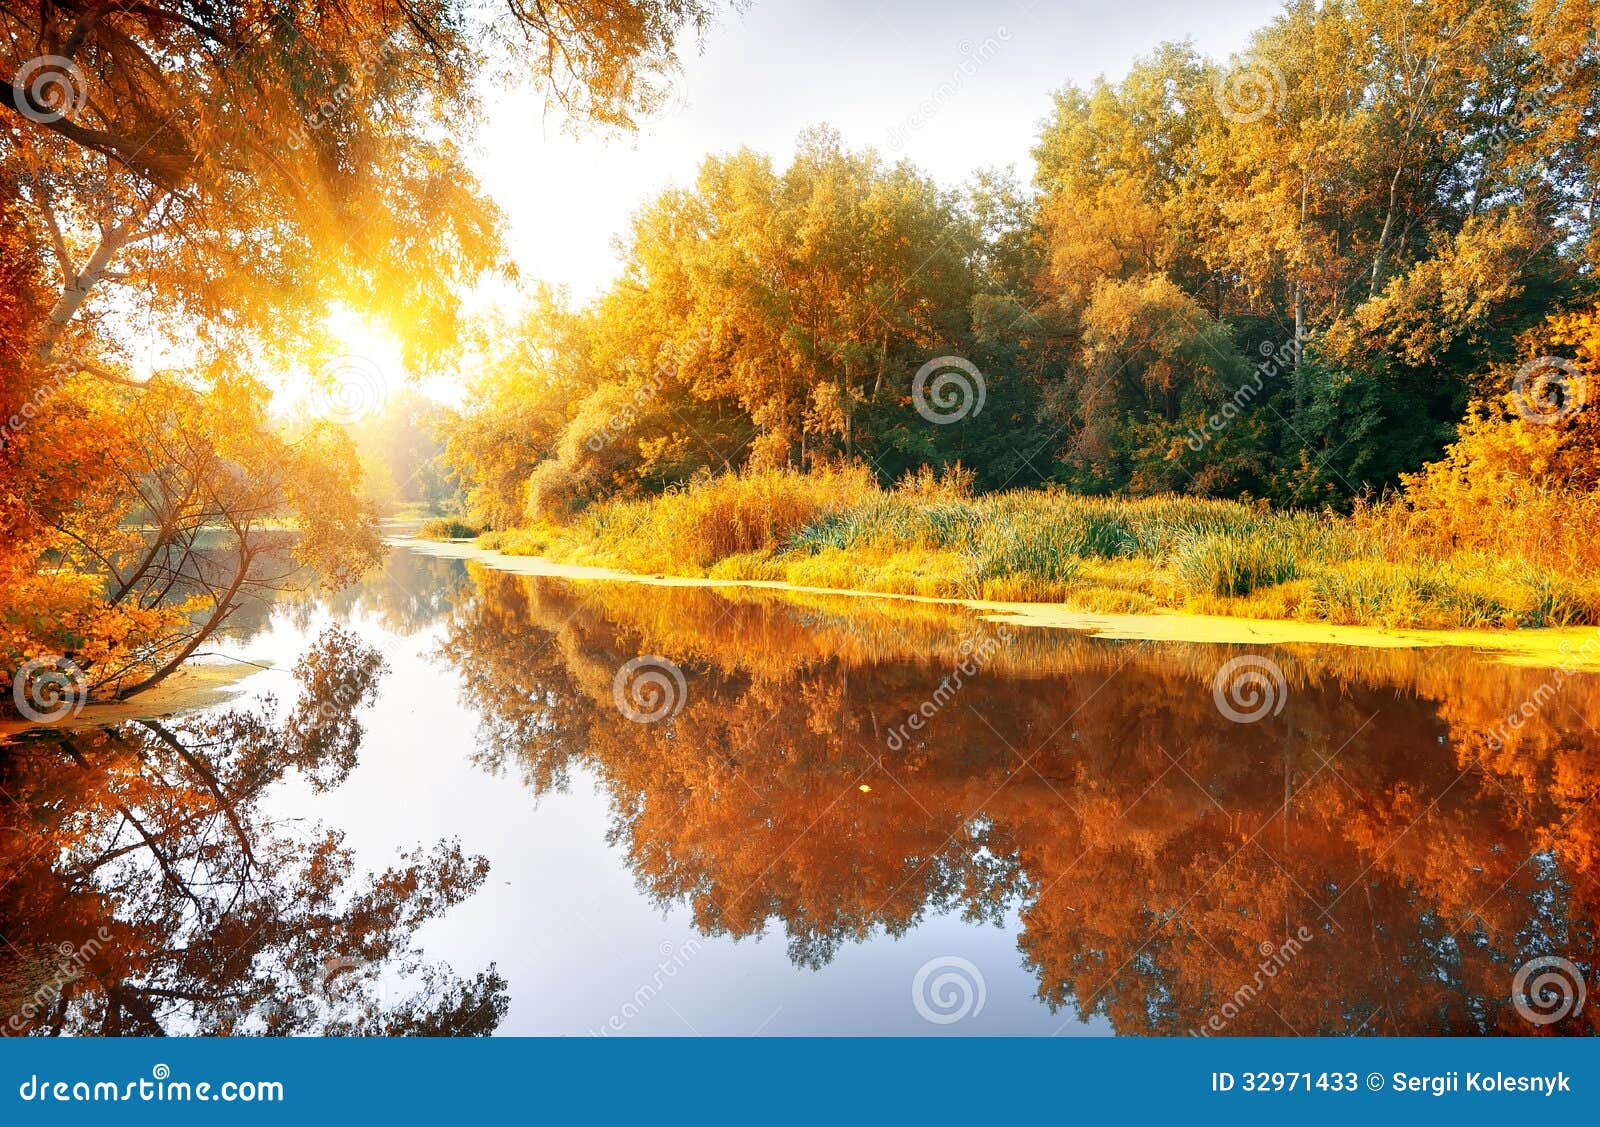 River In A Delightful Autumn Forest Stock Image Image Of Environment